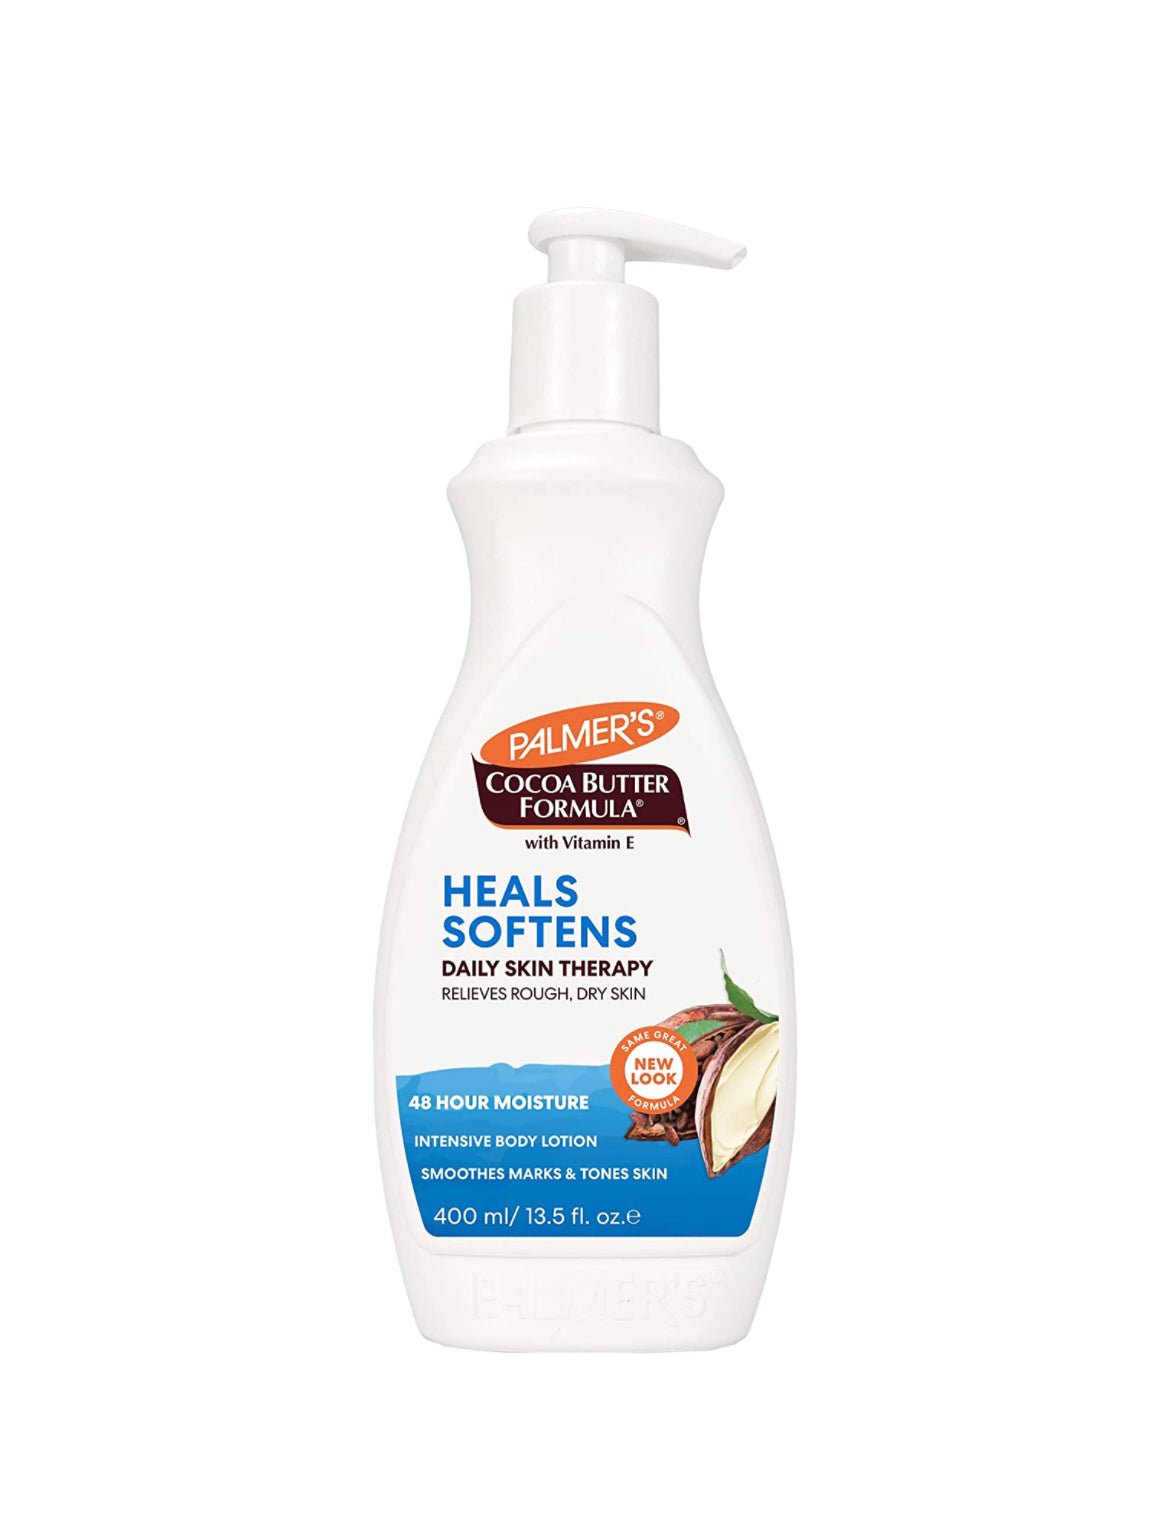 Palmer's Cocoa Butter Formula Daily Skin Therapy - Seraphim Beauty